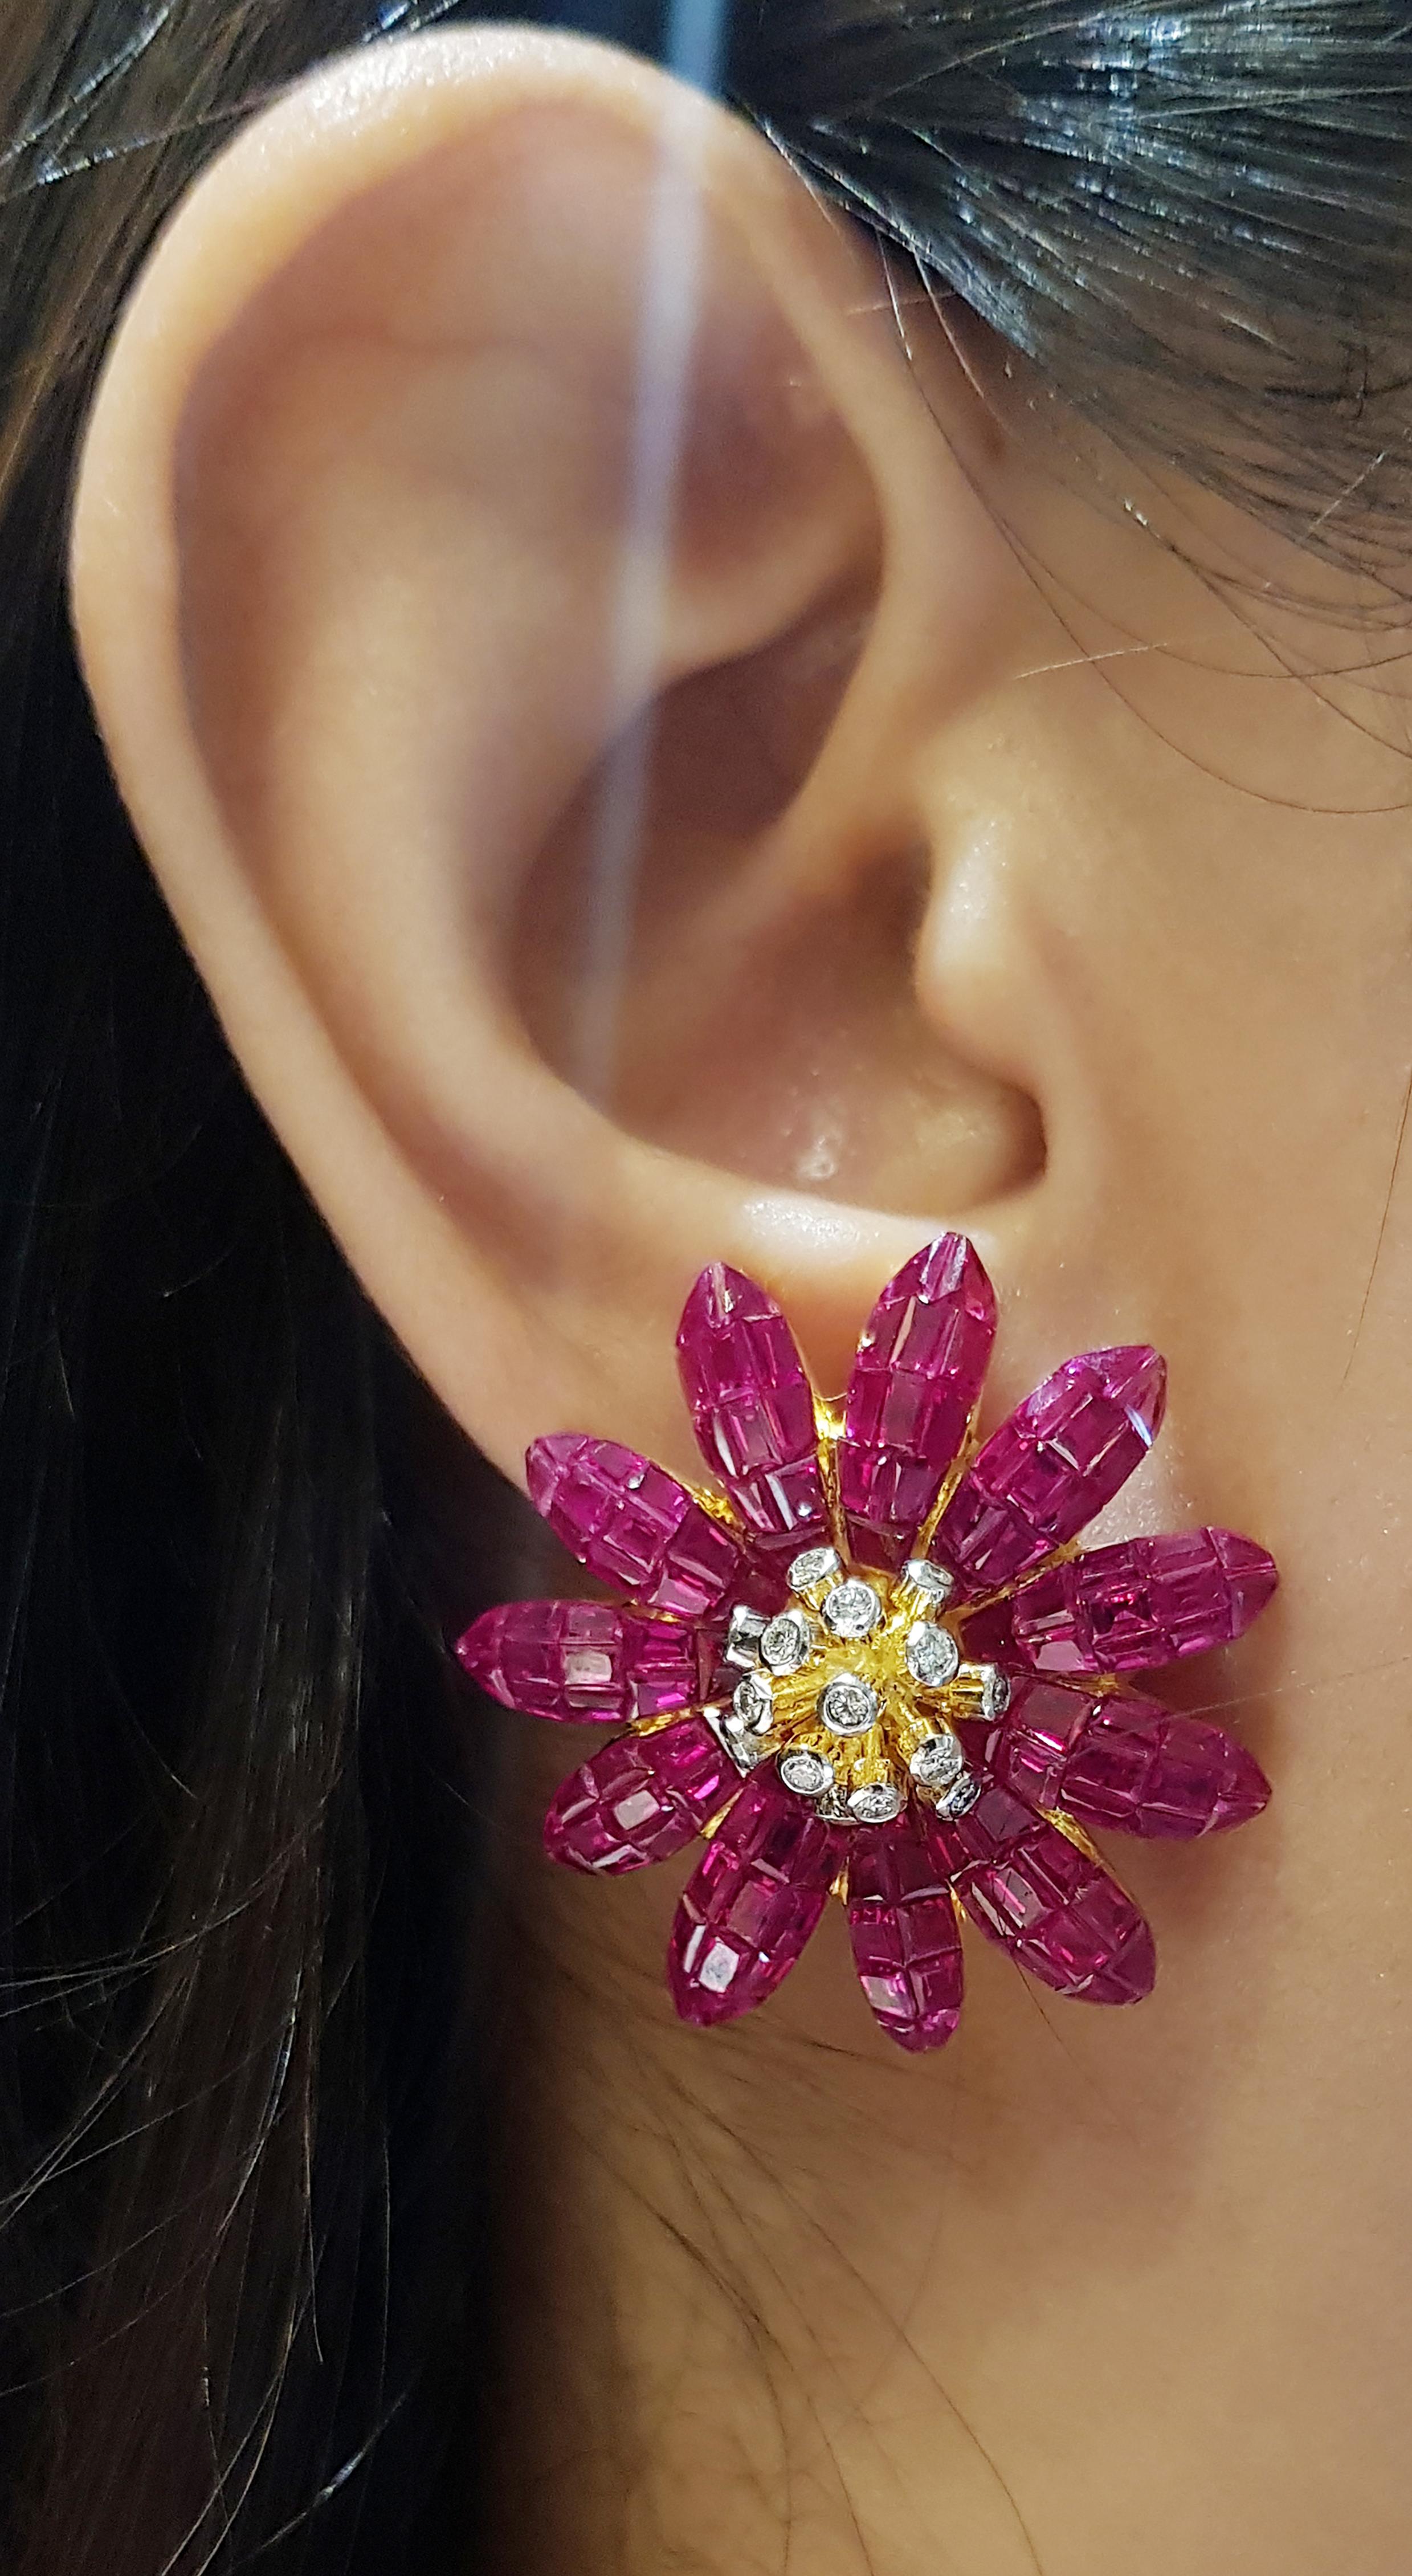 Ruby 17.78 carats with Diamond 0.38 carat Earrings set in 18 Karat Gold Settings

Width:  3.1 cm 
Length: 3.1 cm
Total Weight: 19.82 grams

